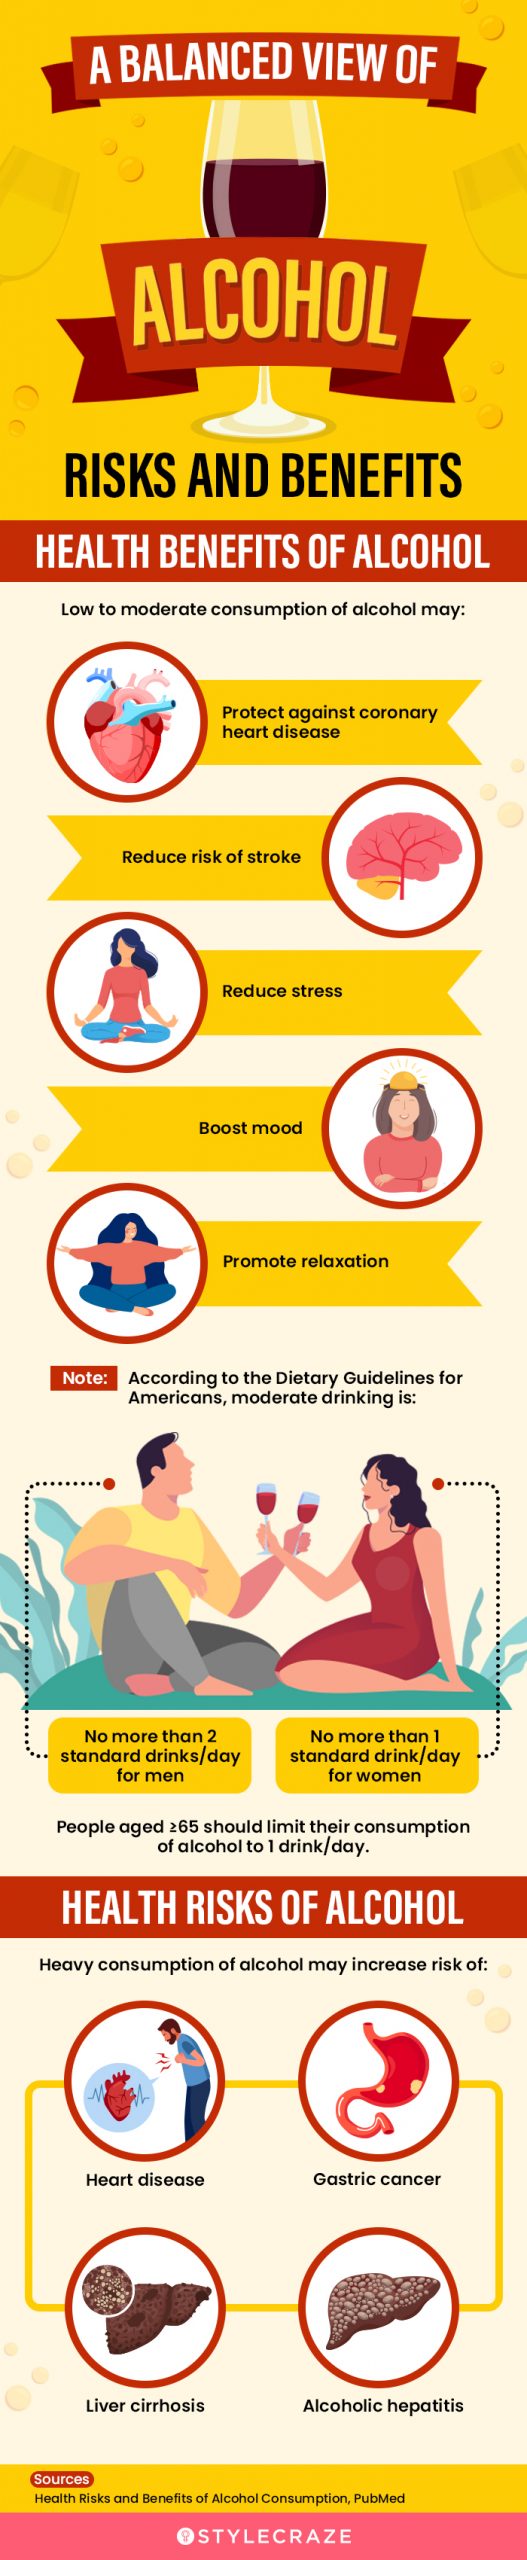 a balanced view of alcohol risks and benefits (infographic)